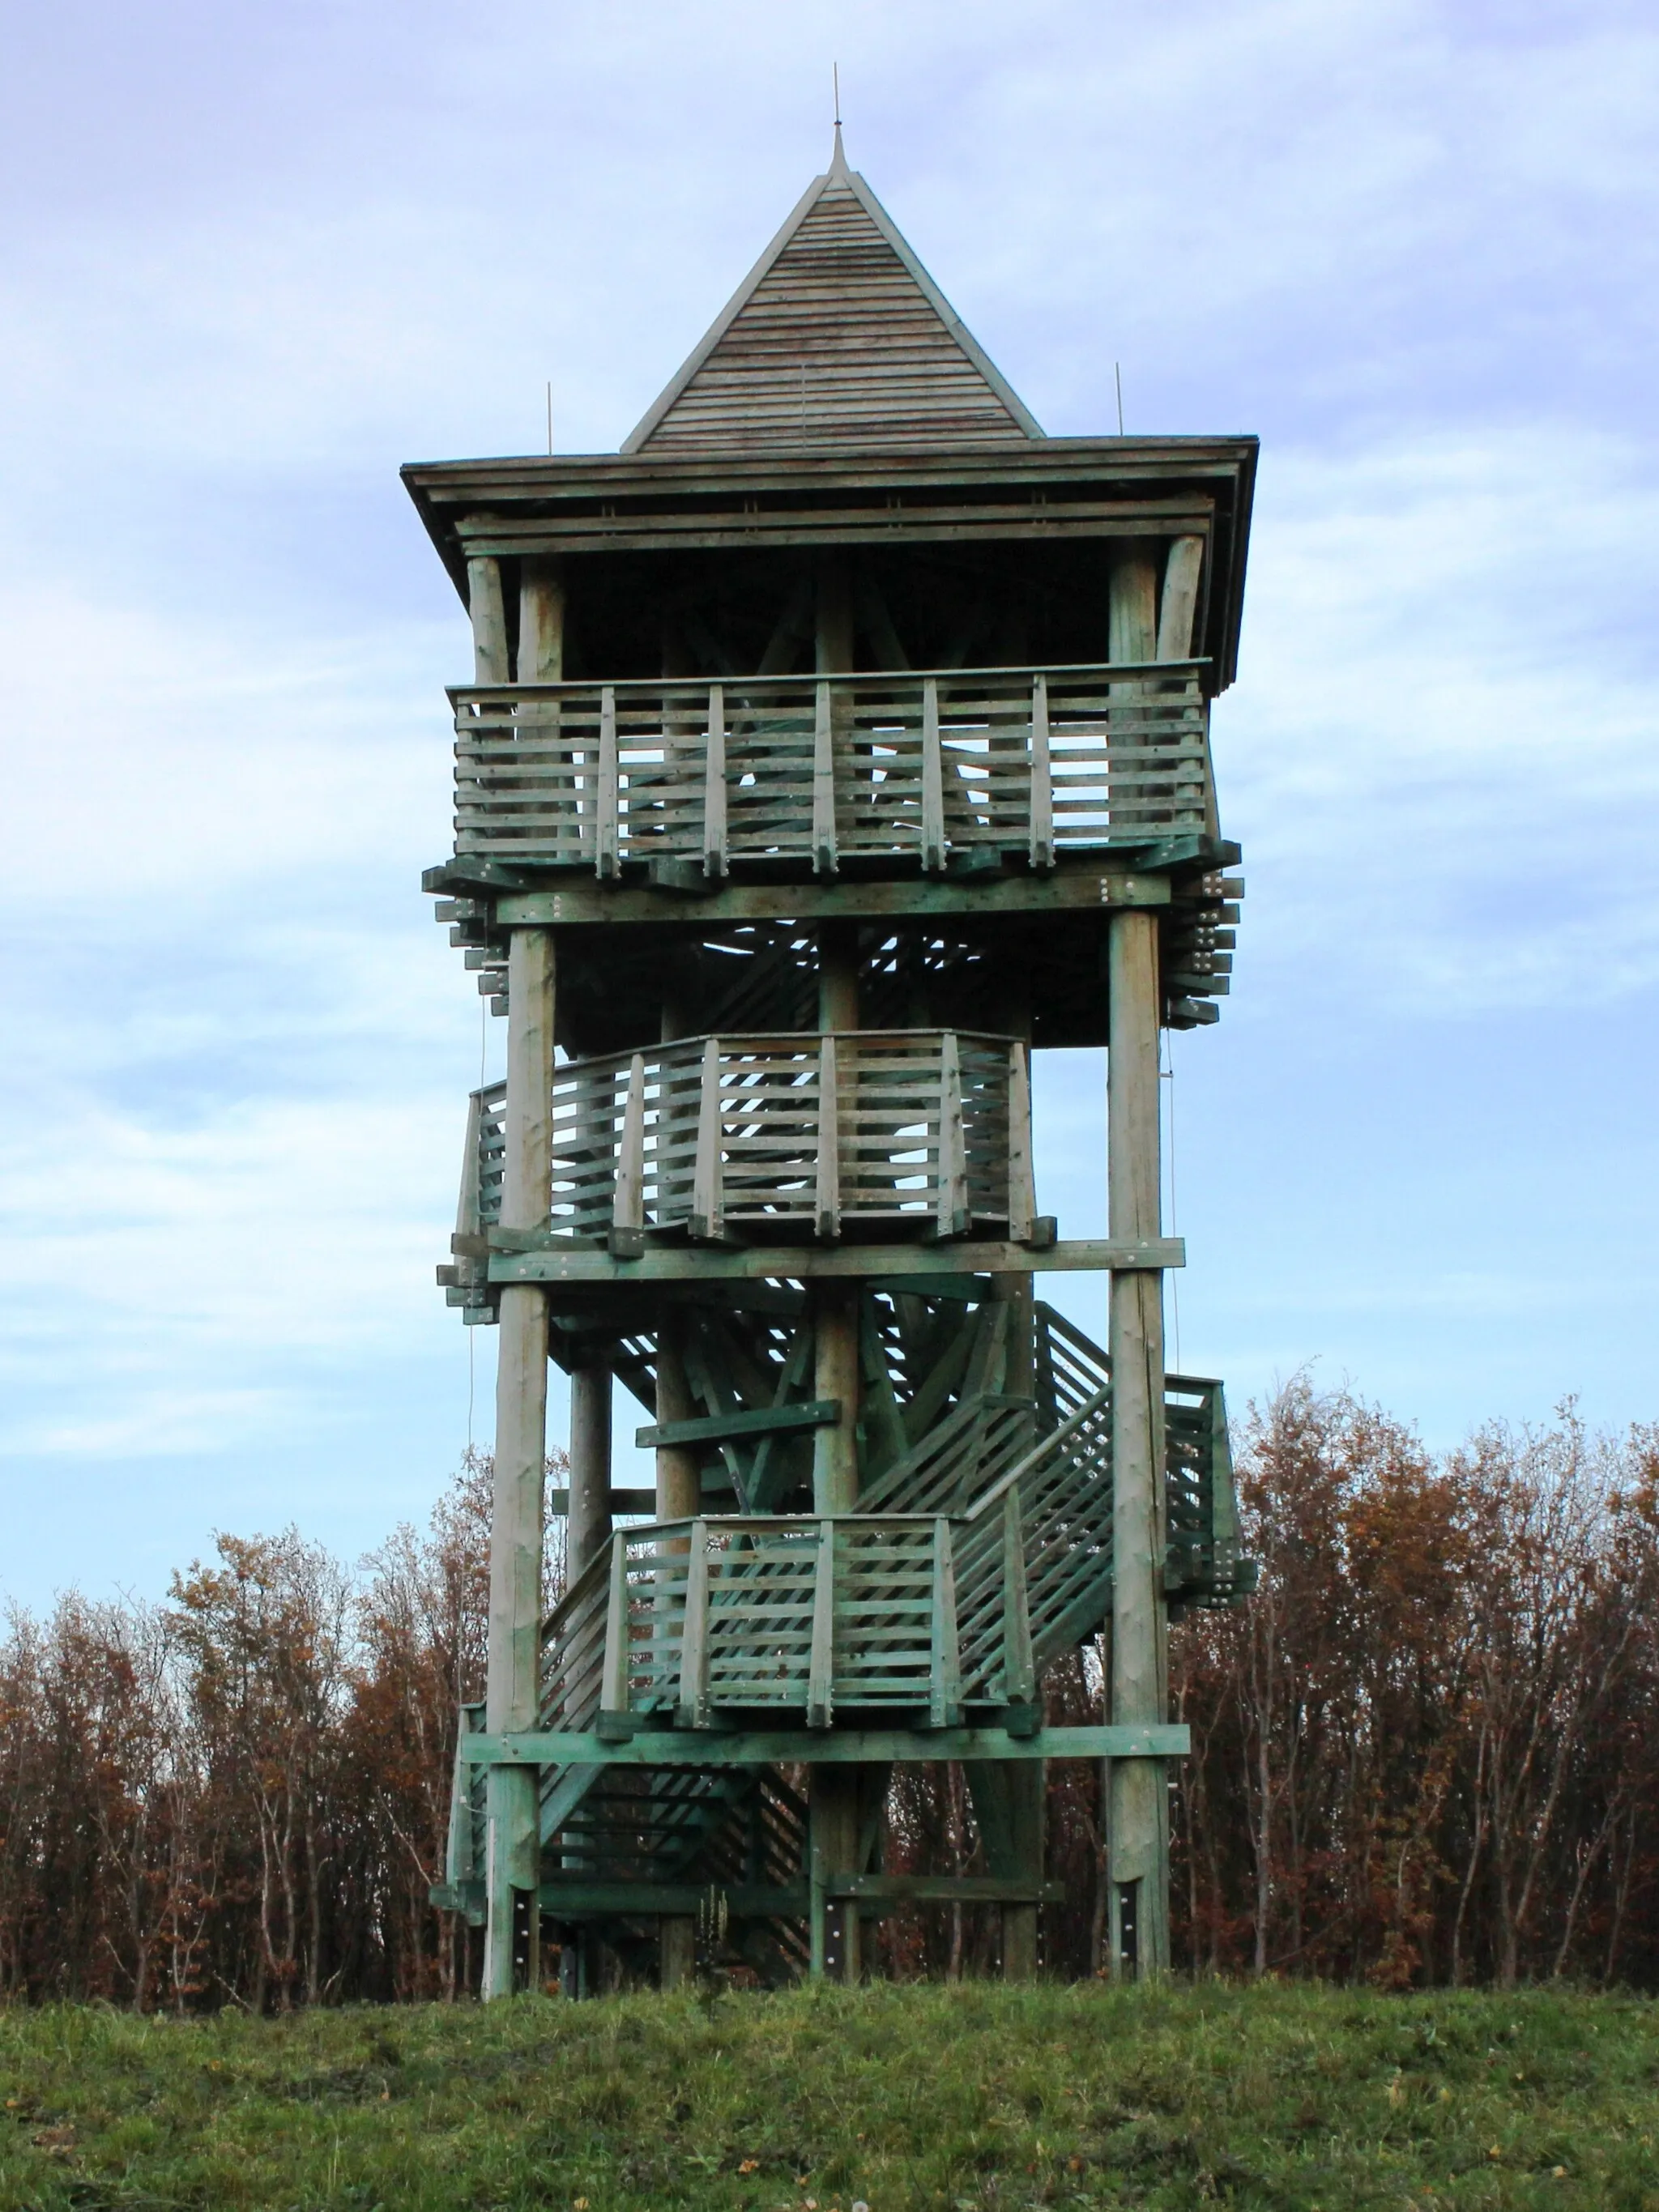 Photo showing: The Magas-bérci Lookout Tower (Sopron, Hungary), built in 2005.